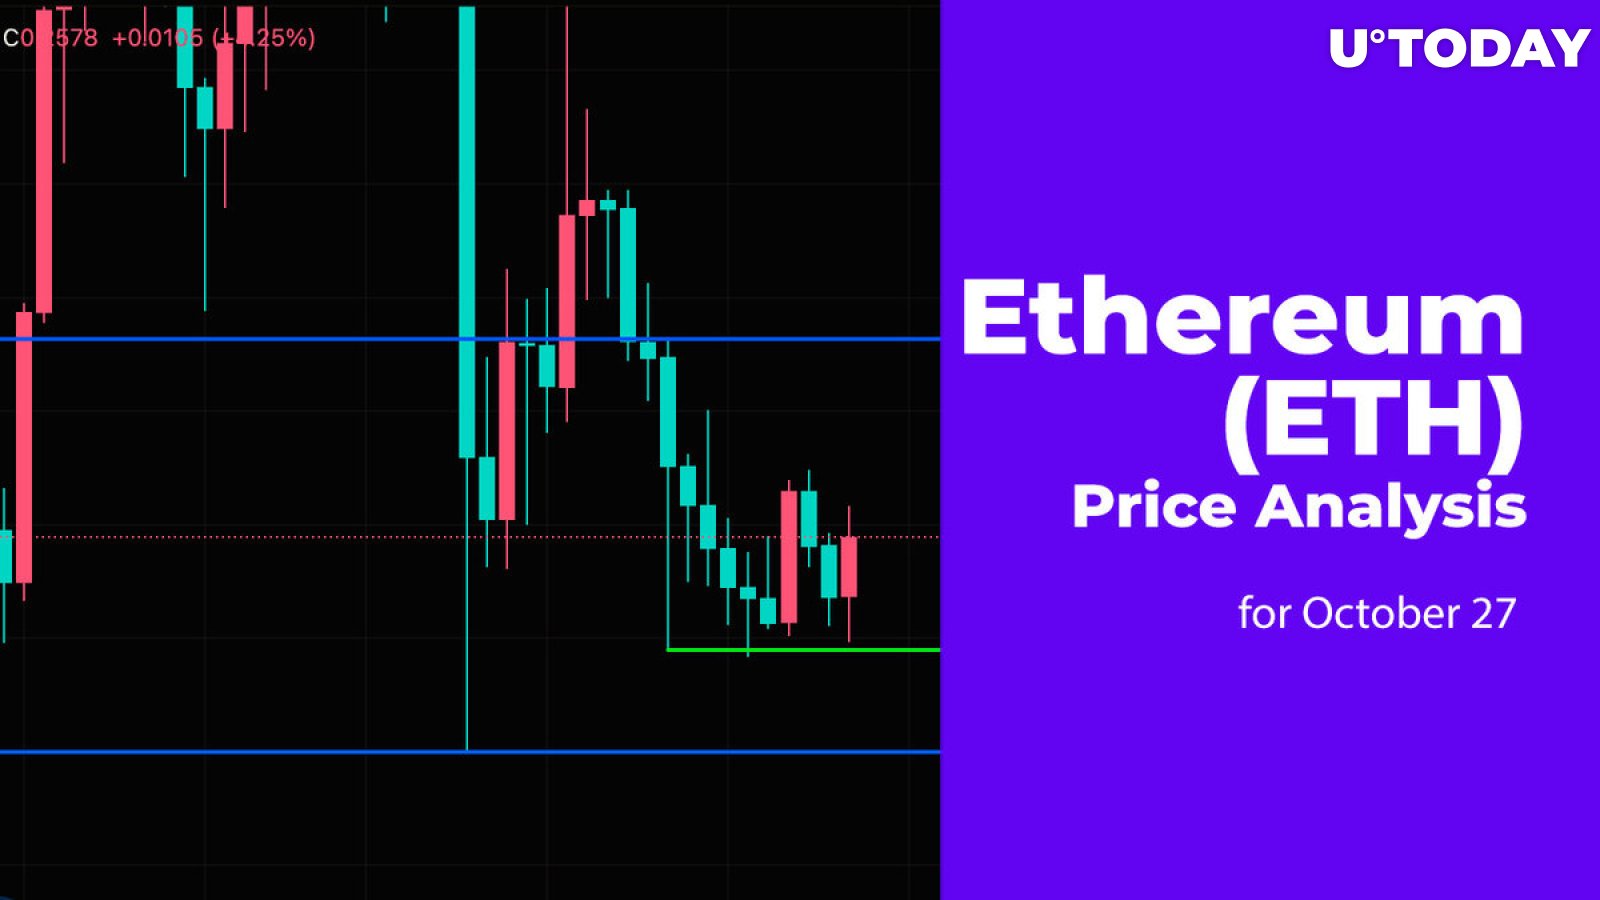 Ethereum (ETH) Price Analysis for October 27